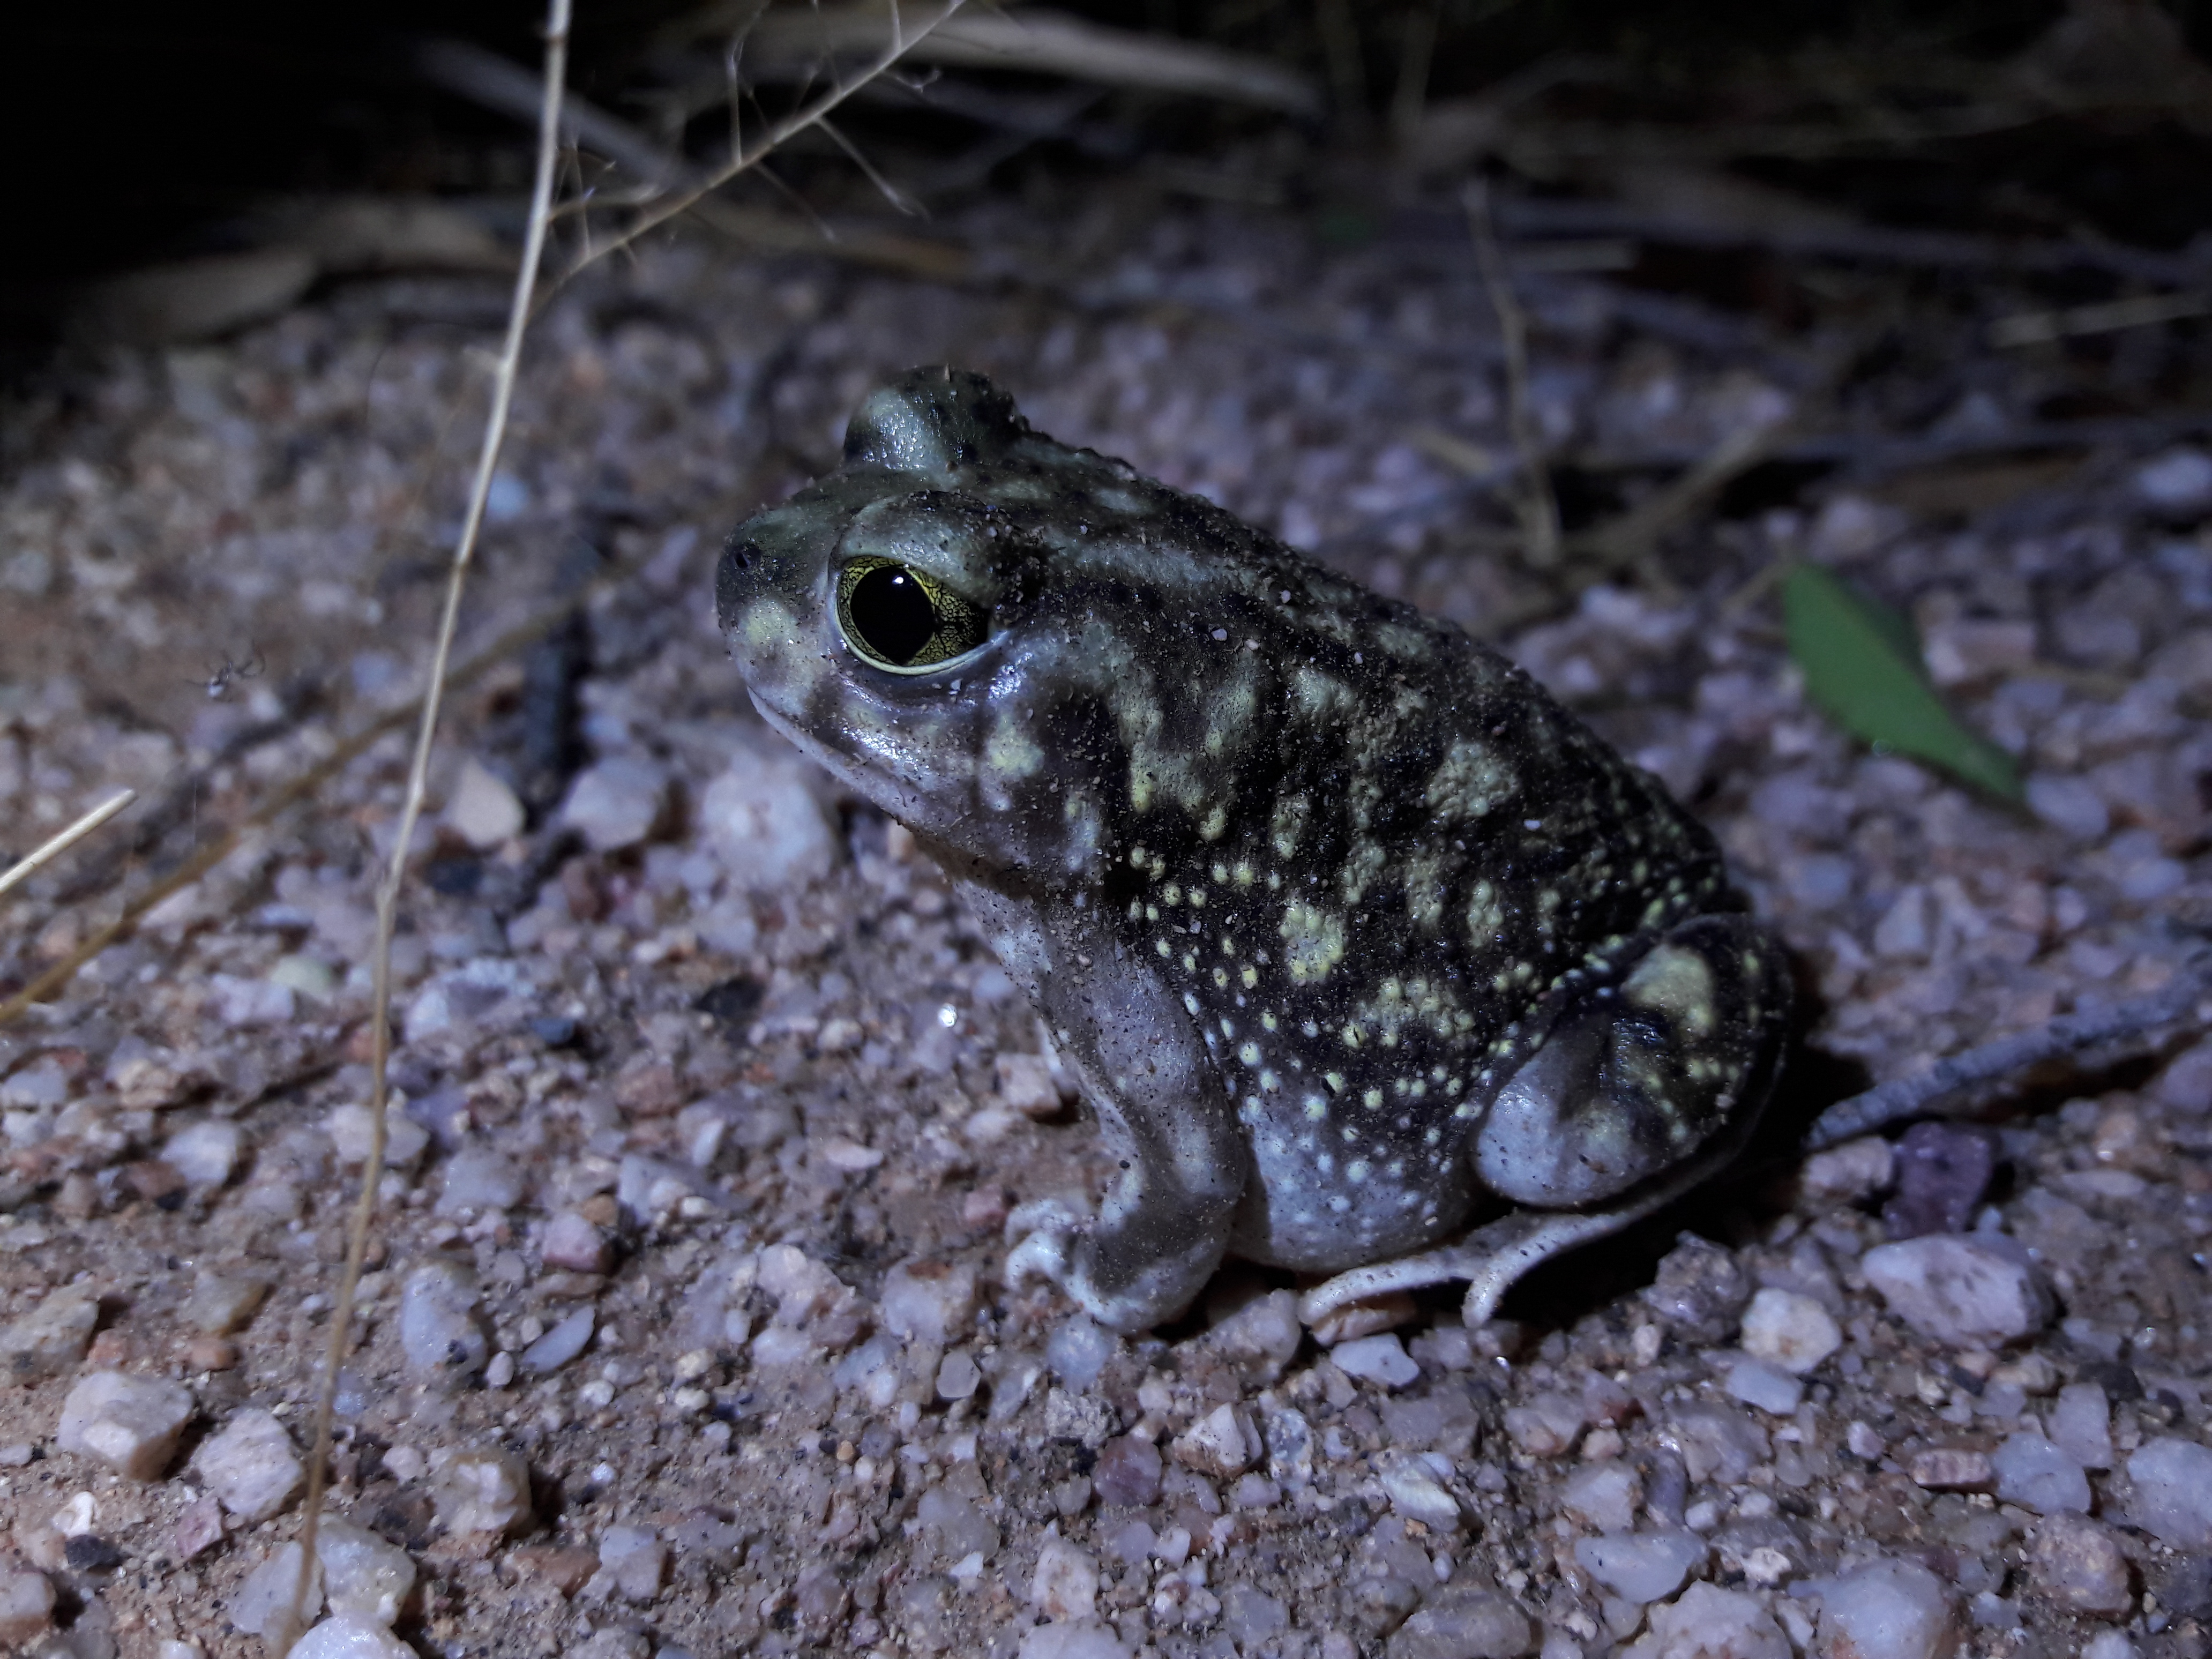 Scaphiopus couchii- Couch's Spadefoot toad